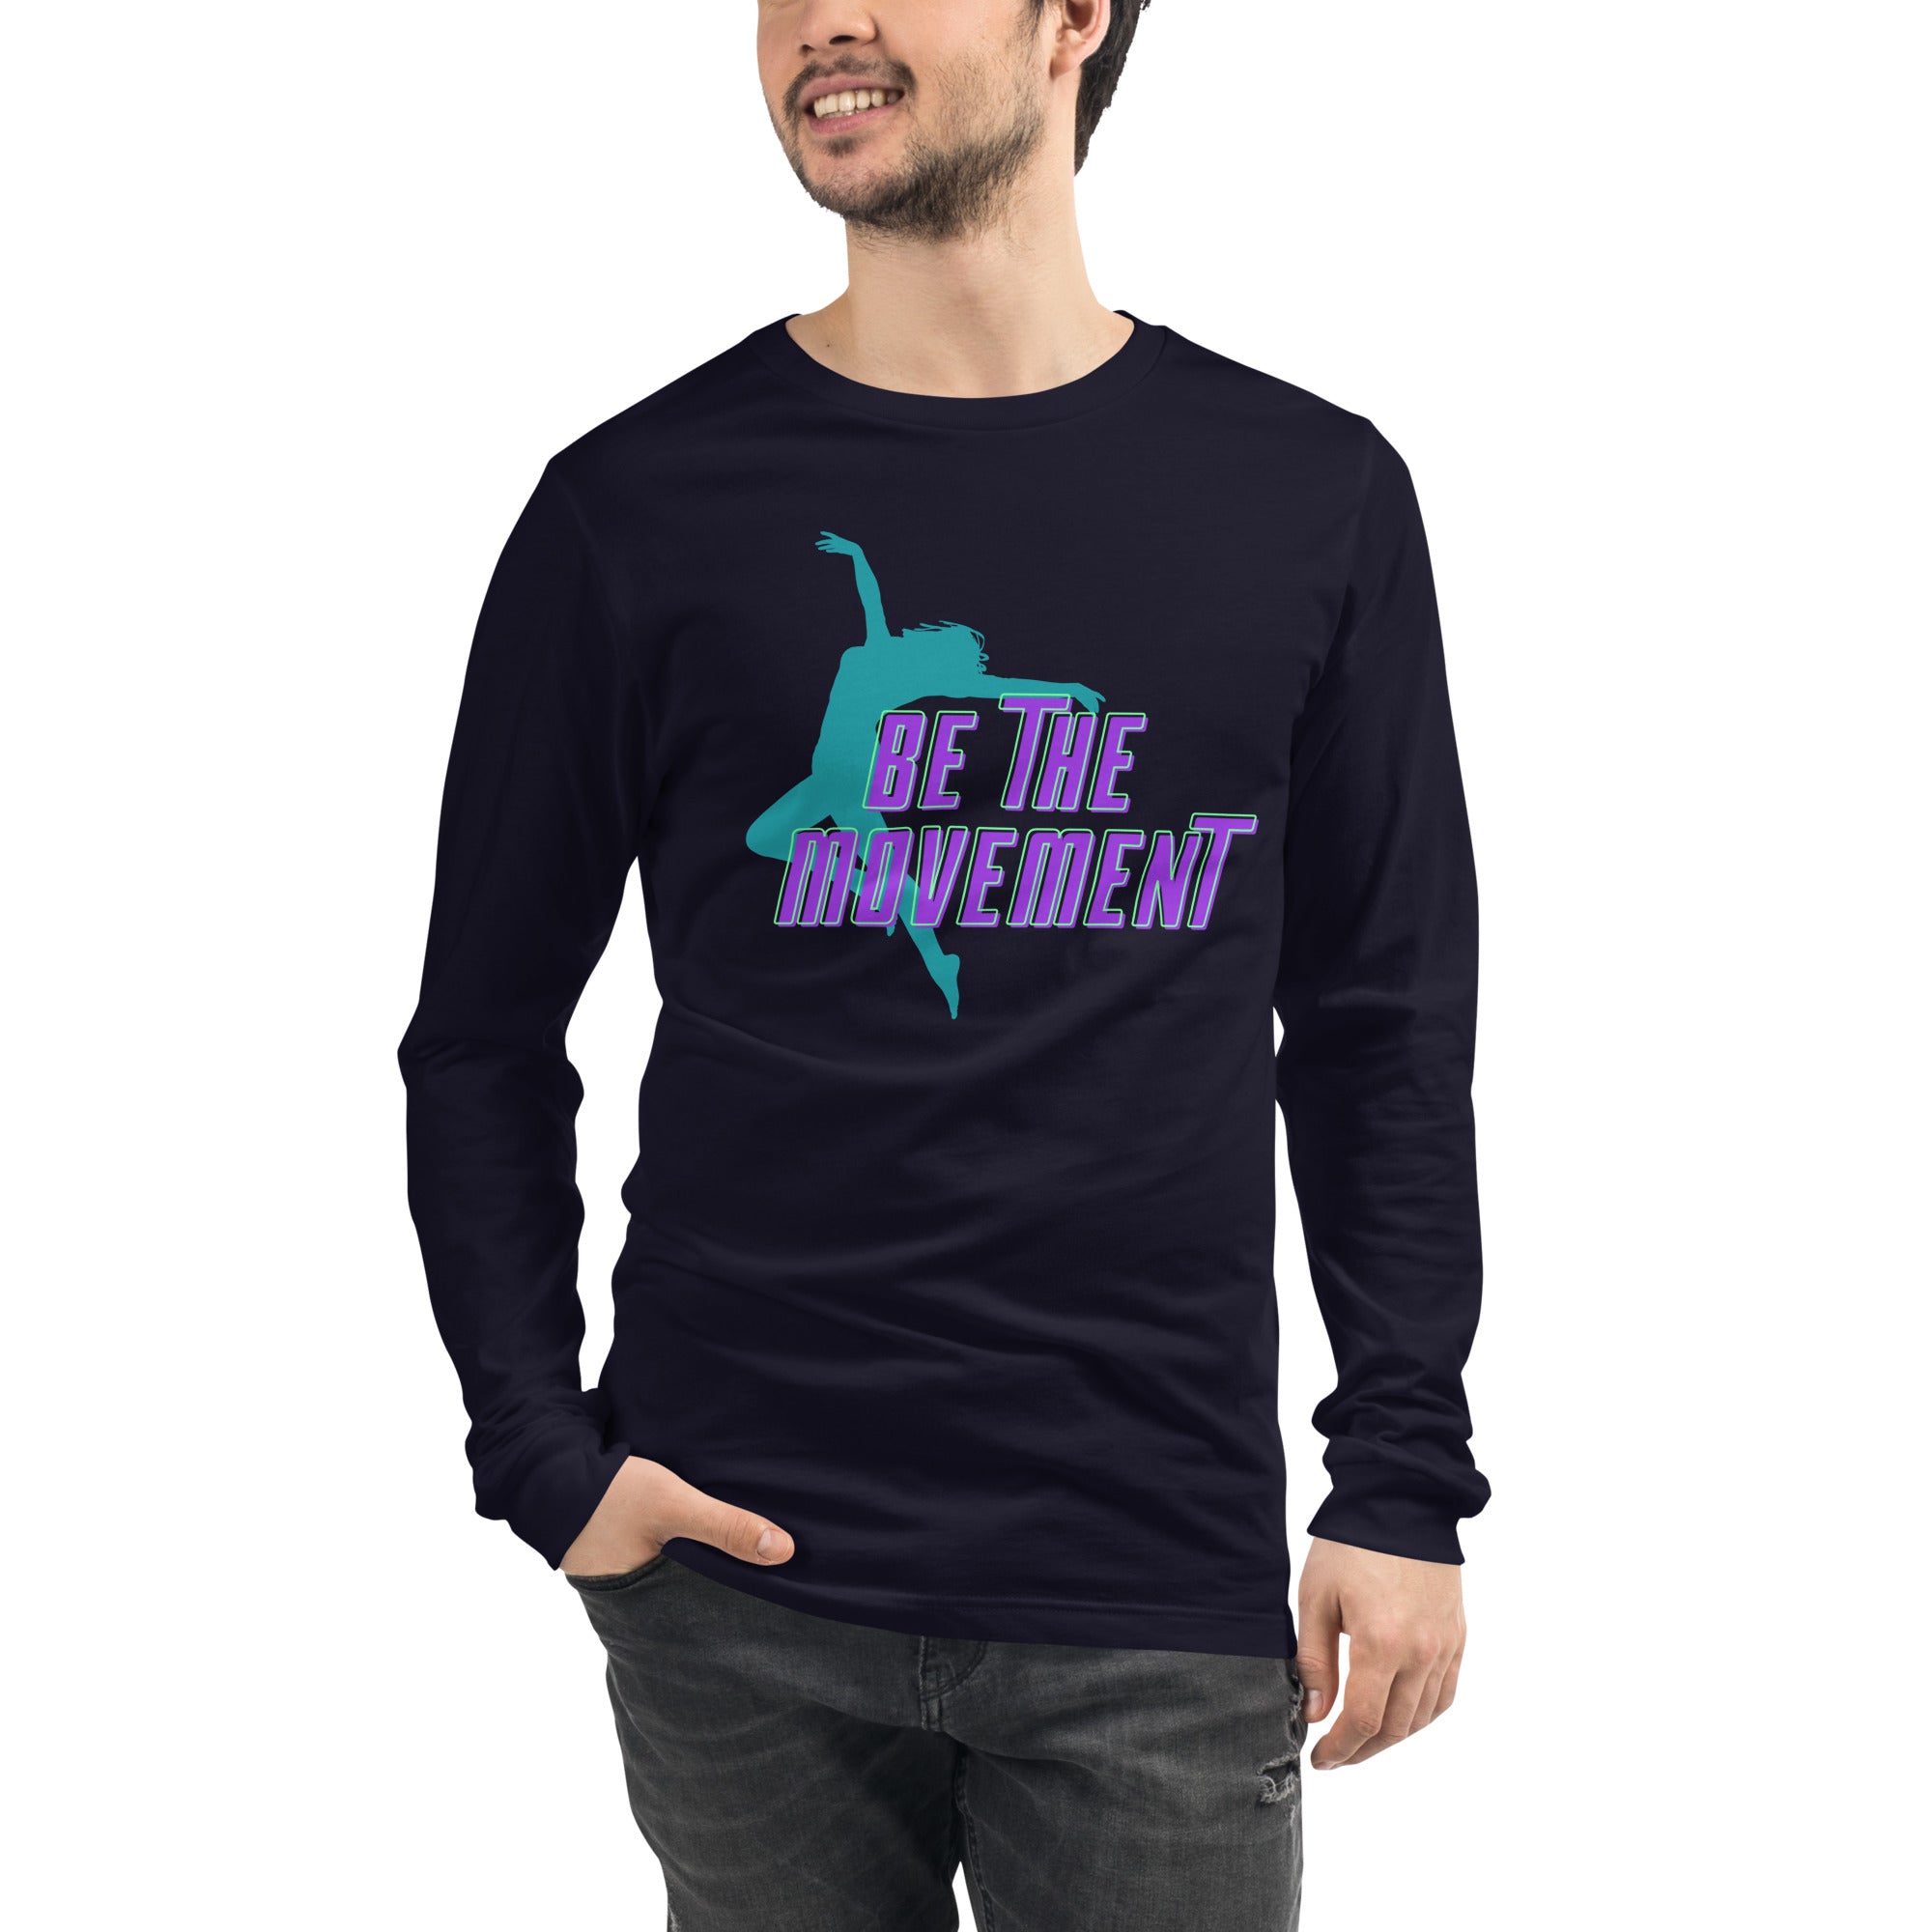 Be The Movement Men's Select Long Sleeve